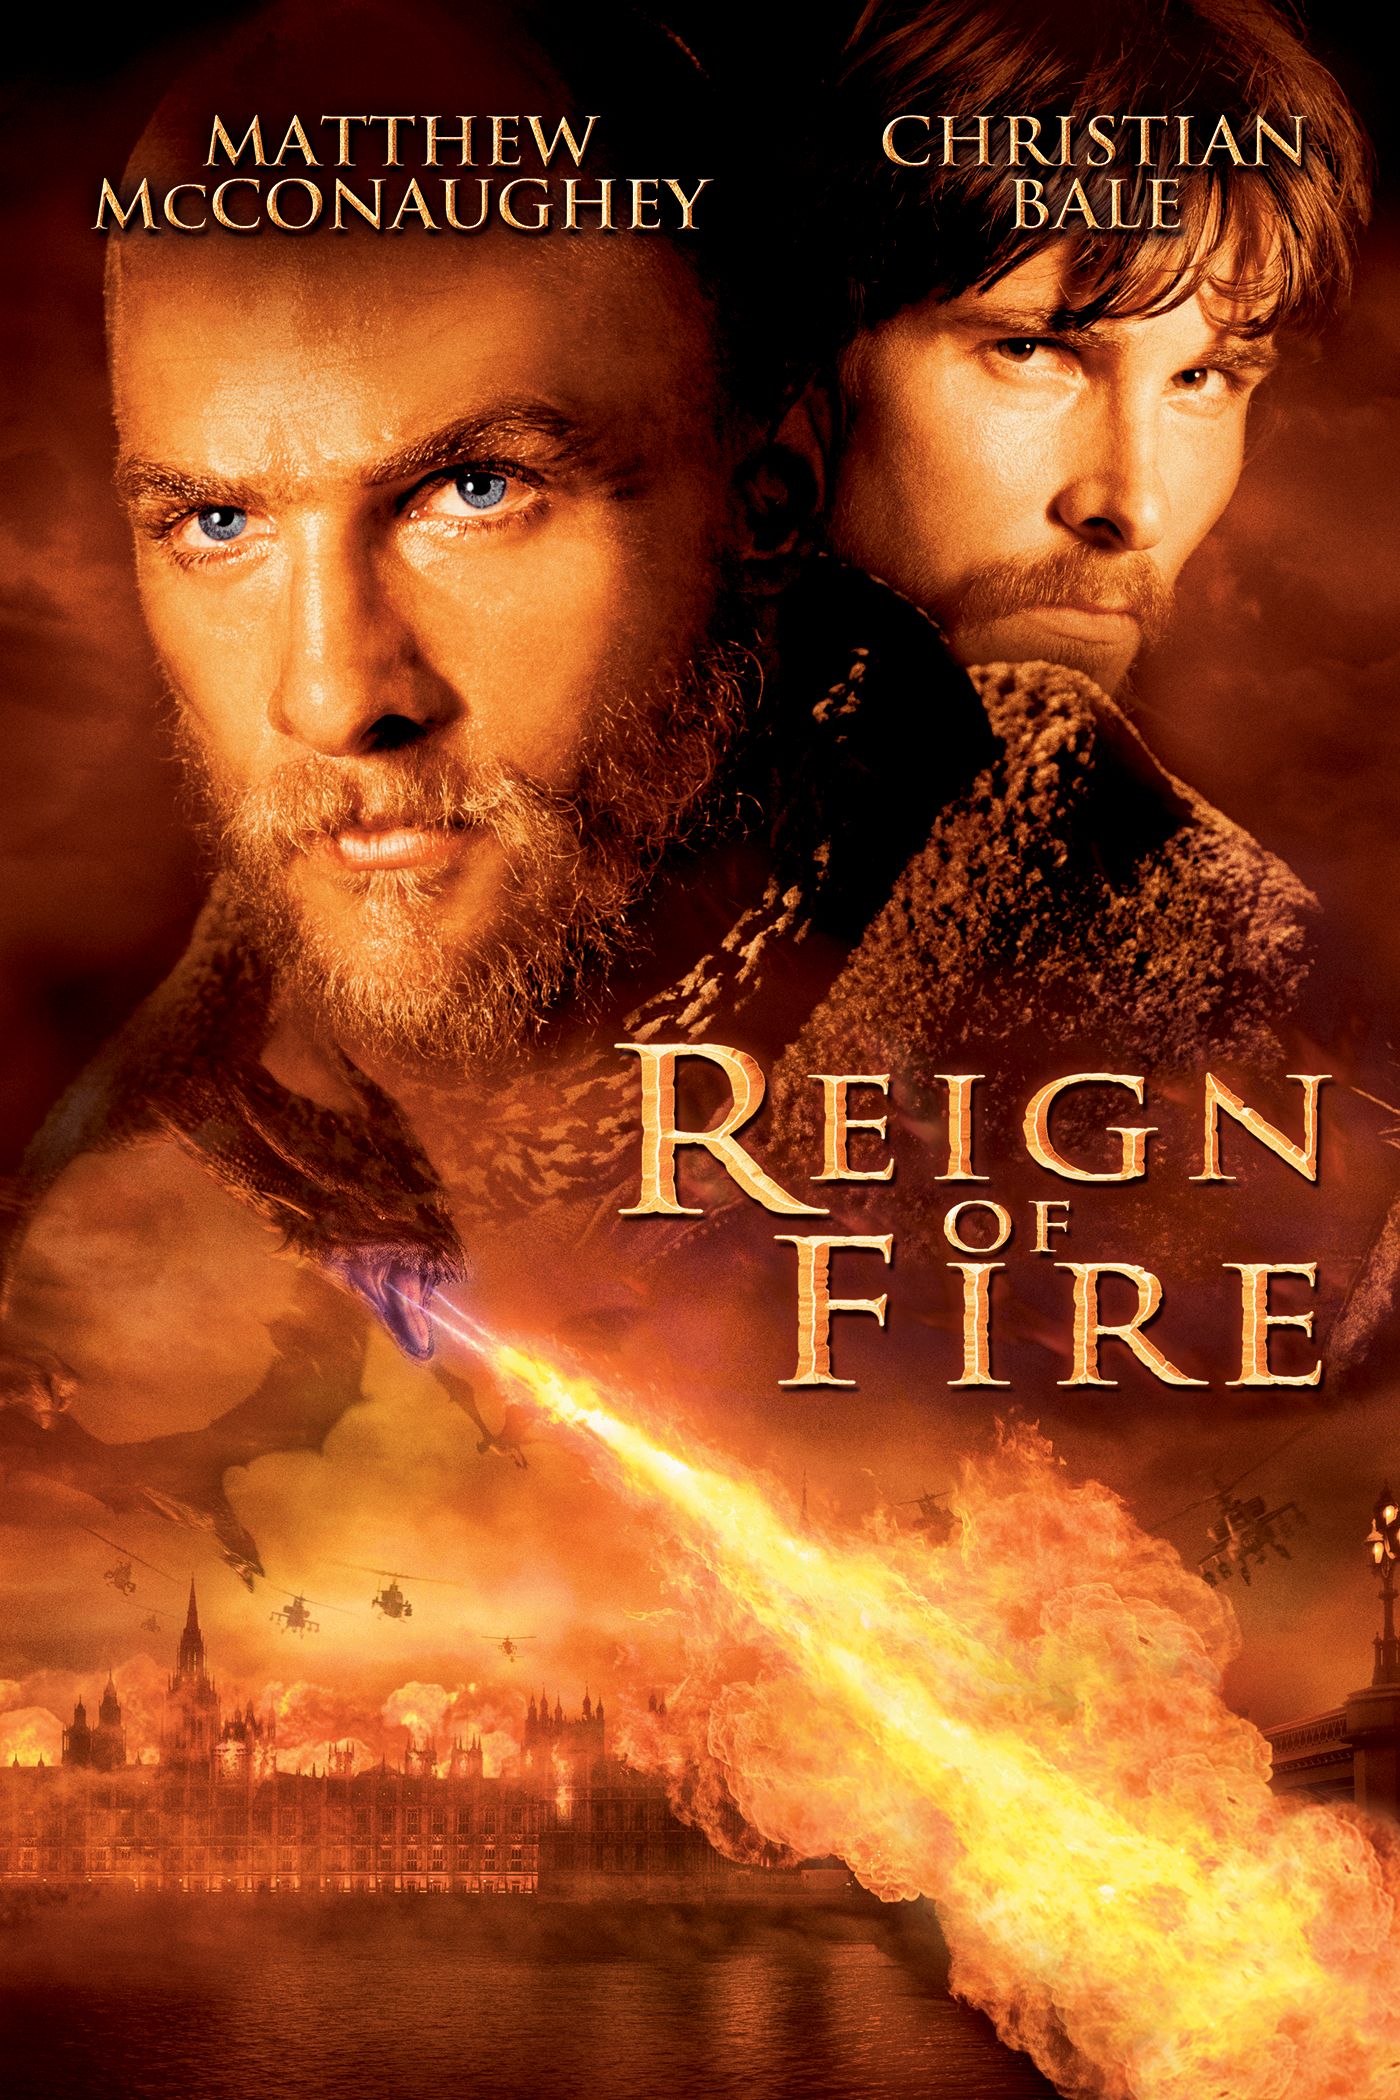 Reign of fire movies anywhere